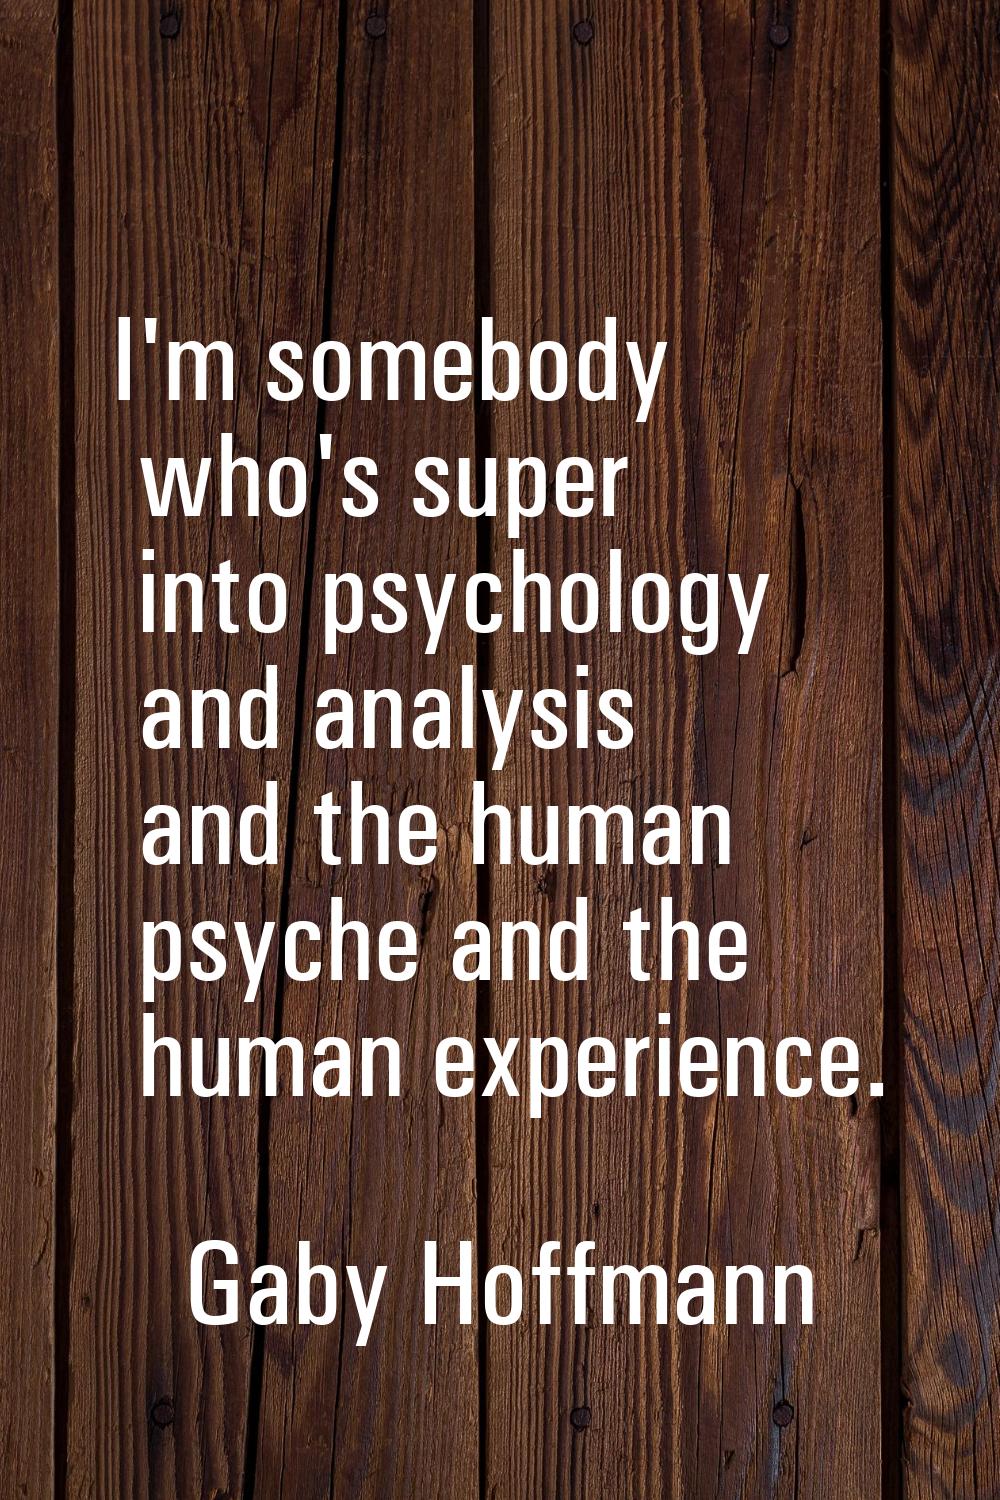 I'm somebody who's super into psychology and analysis and the human psyche and the human experience